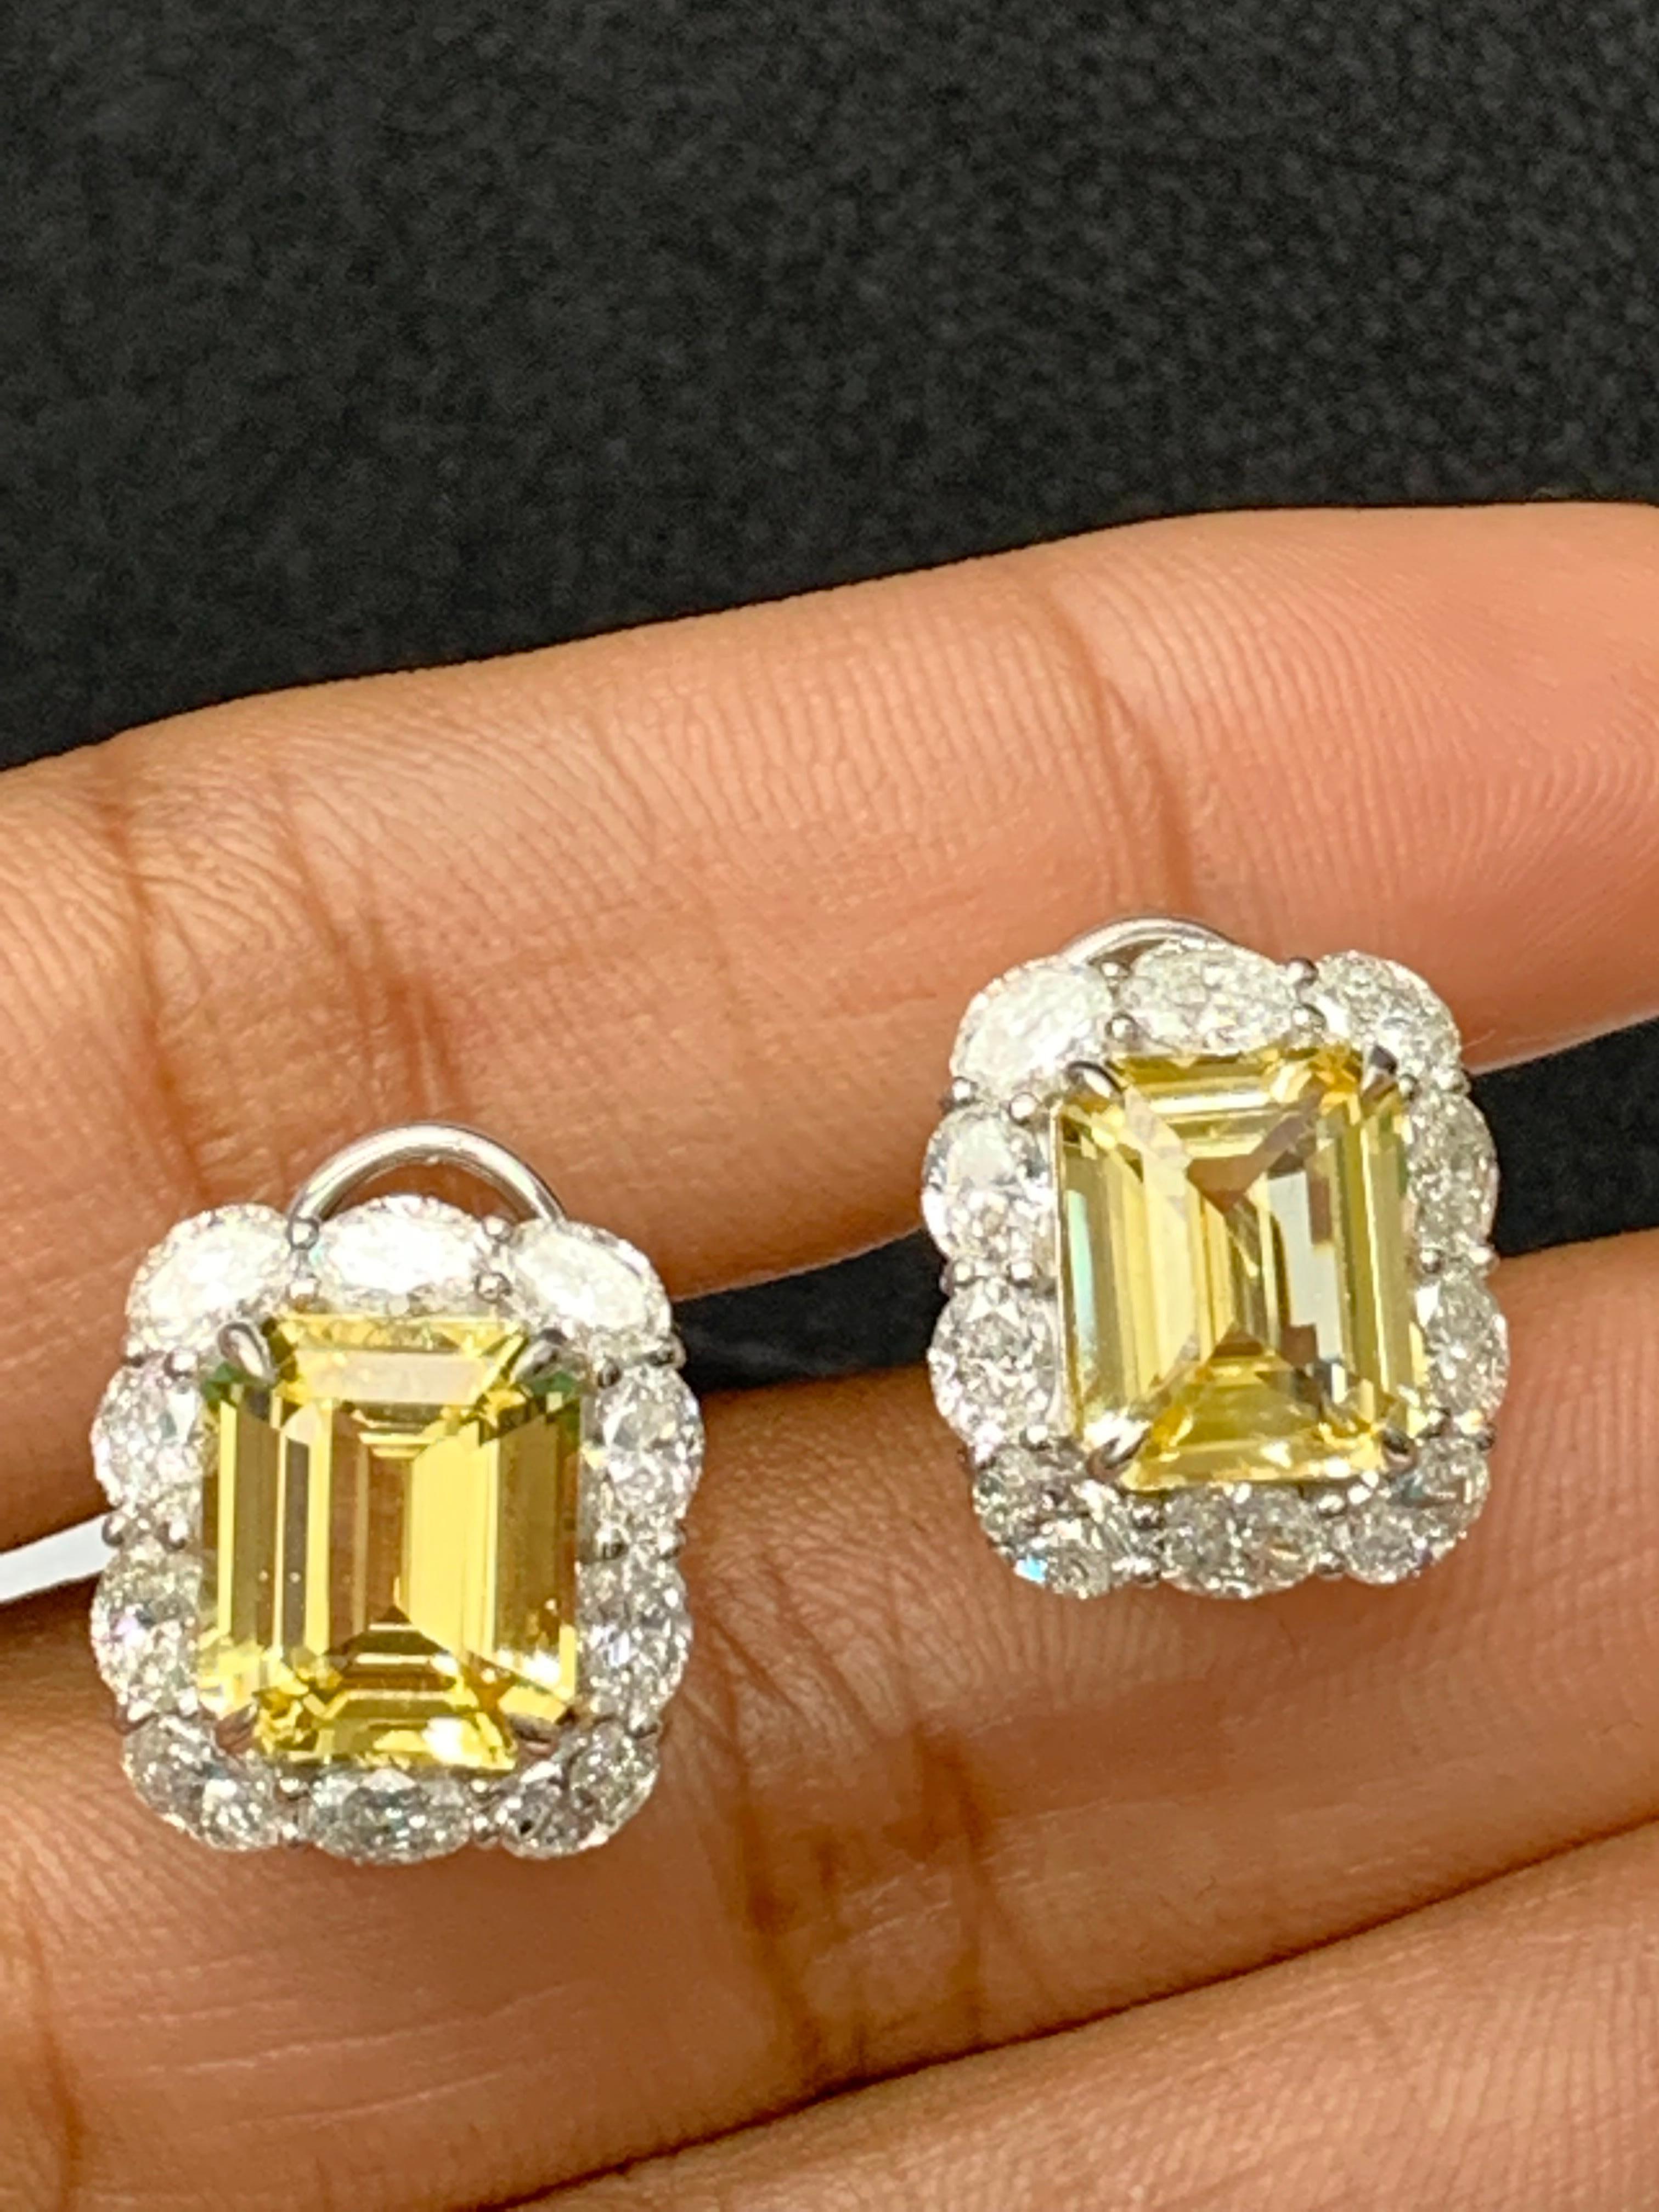 10.09 Carat Emerald Cut Yellow Sapphire Diamond Halo Earring in 18K White Gold For Sale 3